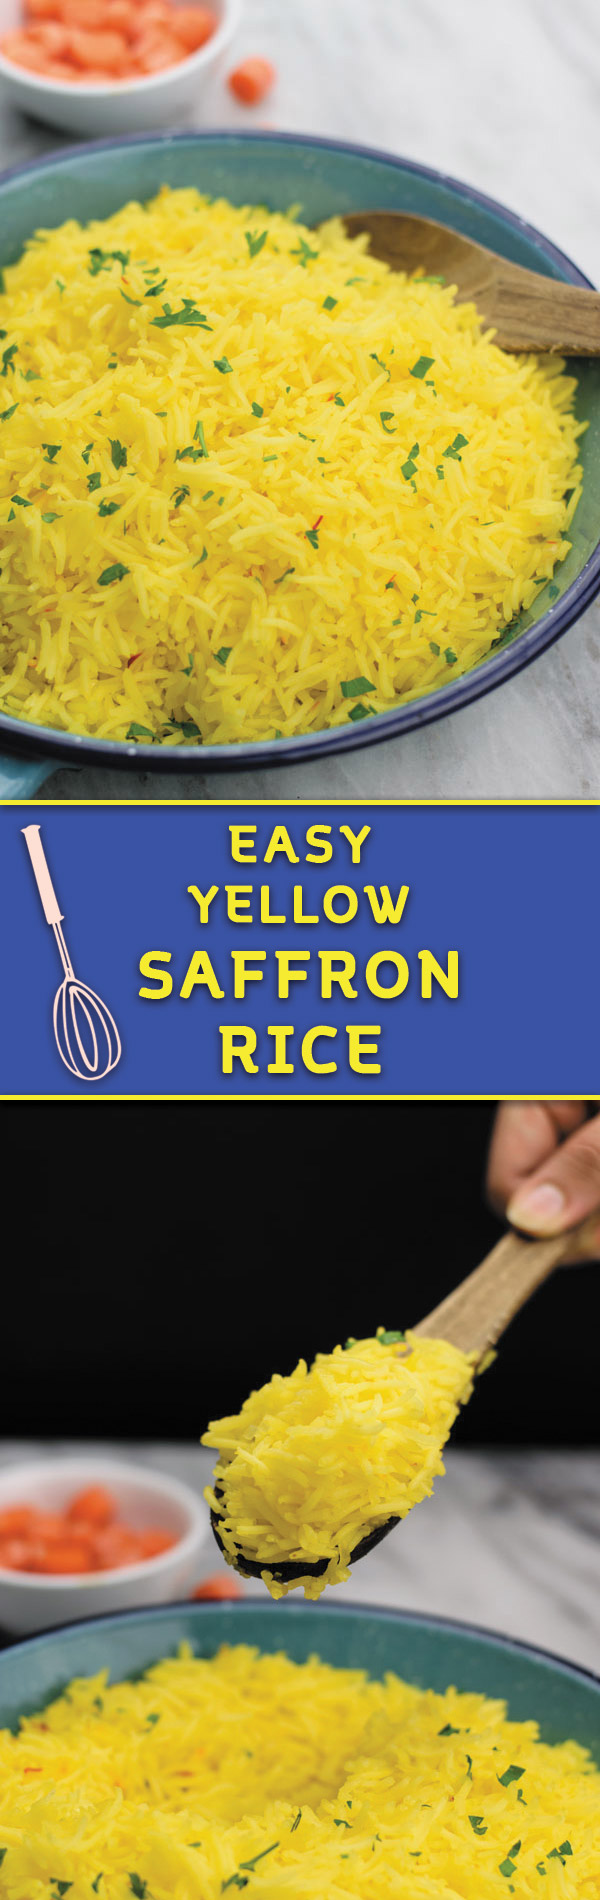 Easy Yellow Saffron Rice - Better Than your favorite Mediterranean restaurant, this SIMPLE yellow saffron rice is full of flavor & GREAT as a side!